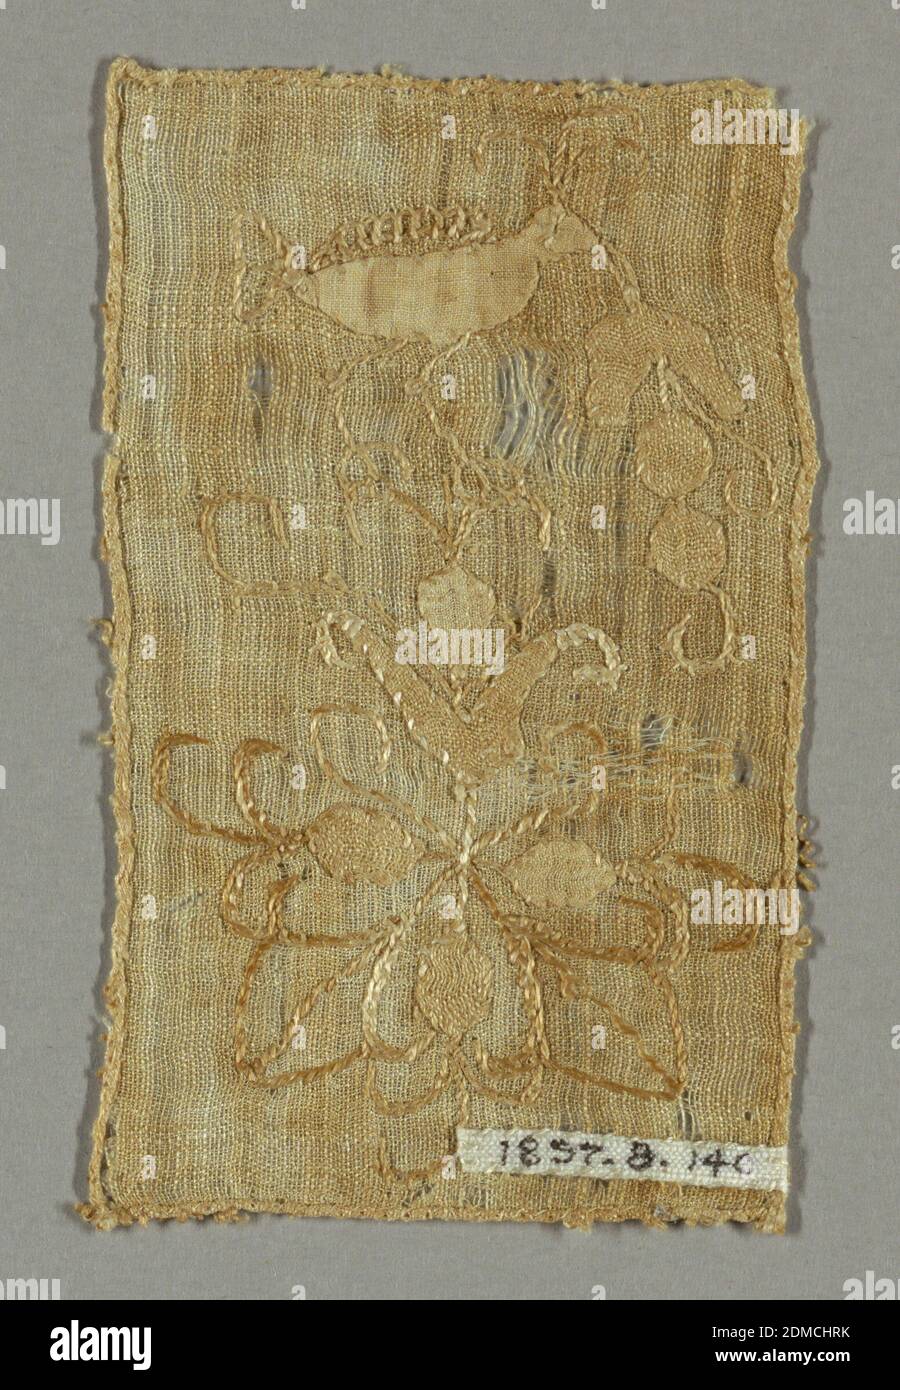 Fragment, Medium: linen Technique: applique and embroidery, Light brown rectangular fragment with a conventionalized design of a bird with a leaf and foliated floral forms., Belgium or France, early 17th century, embroidery & stitching, Fragment Stock Photo